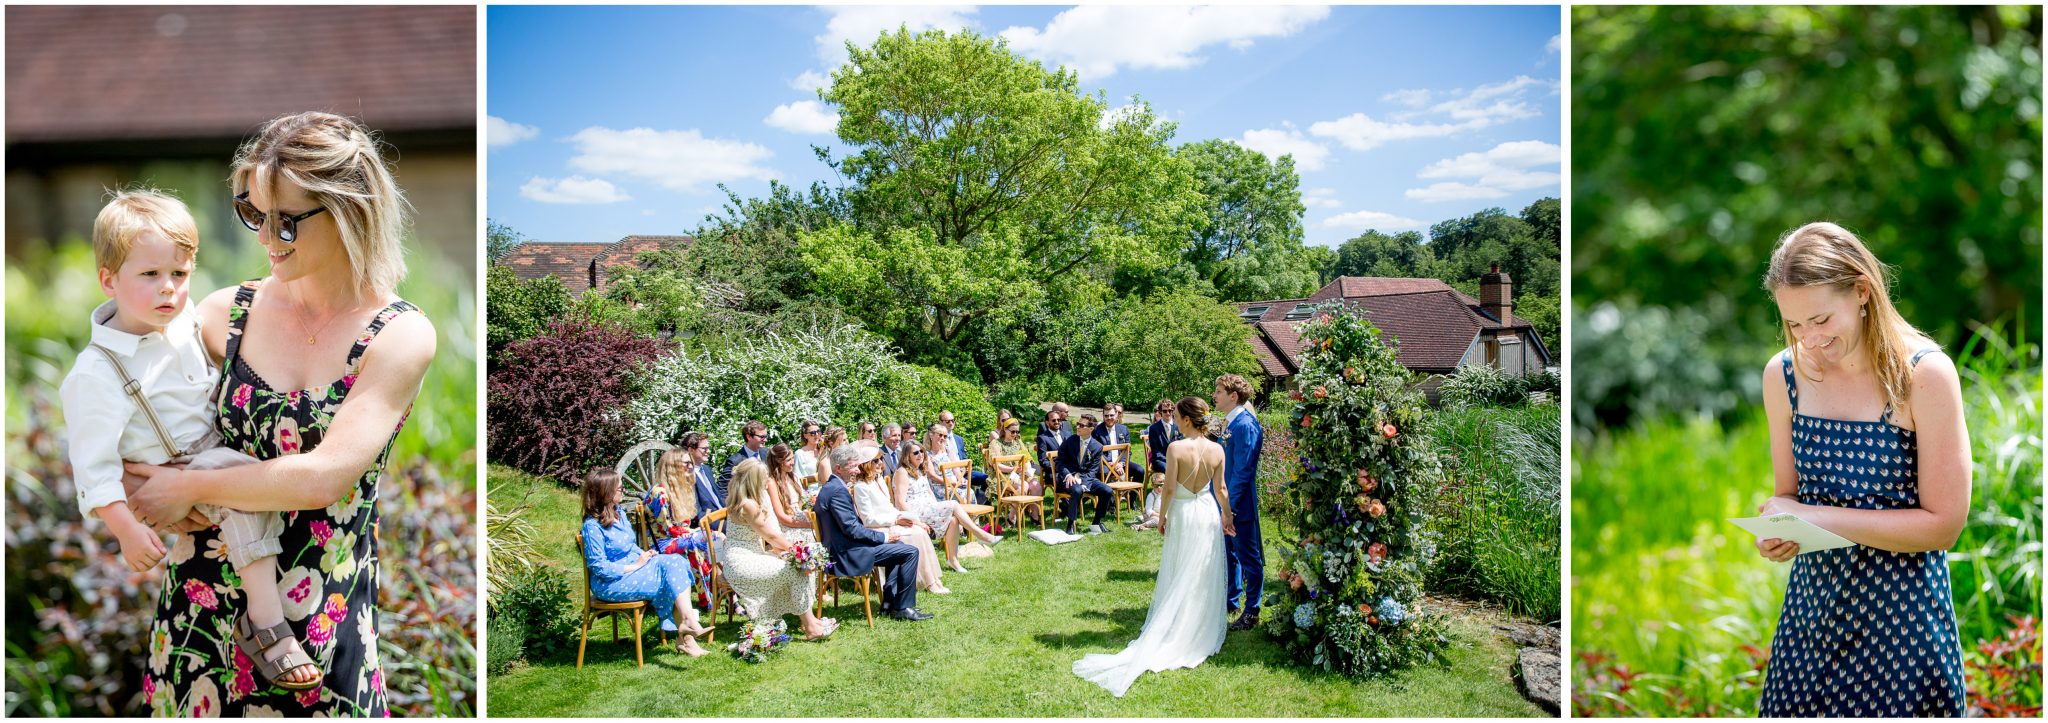 Candid outdoor wedding ceremony photography